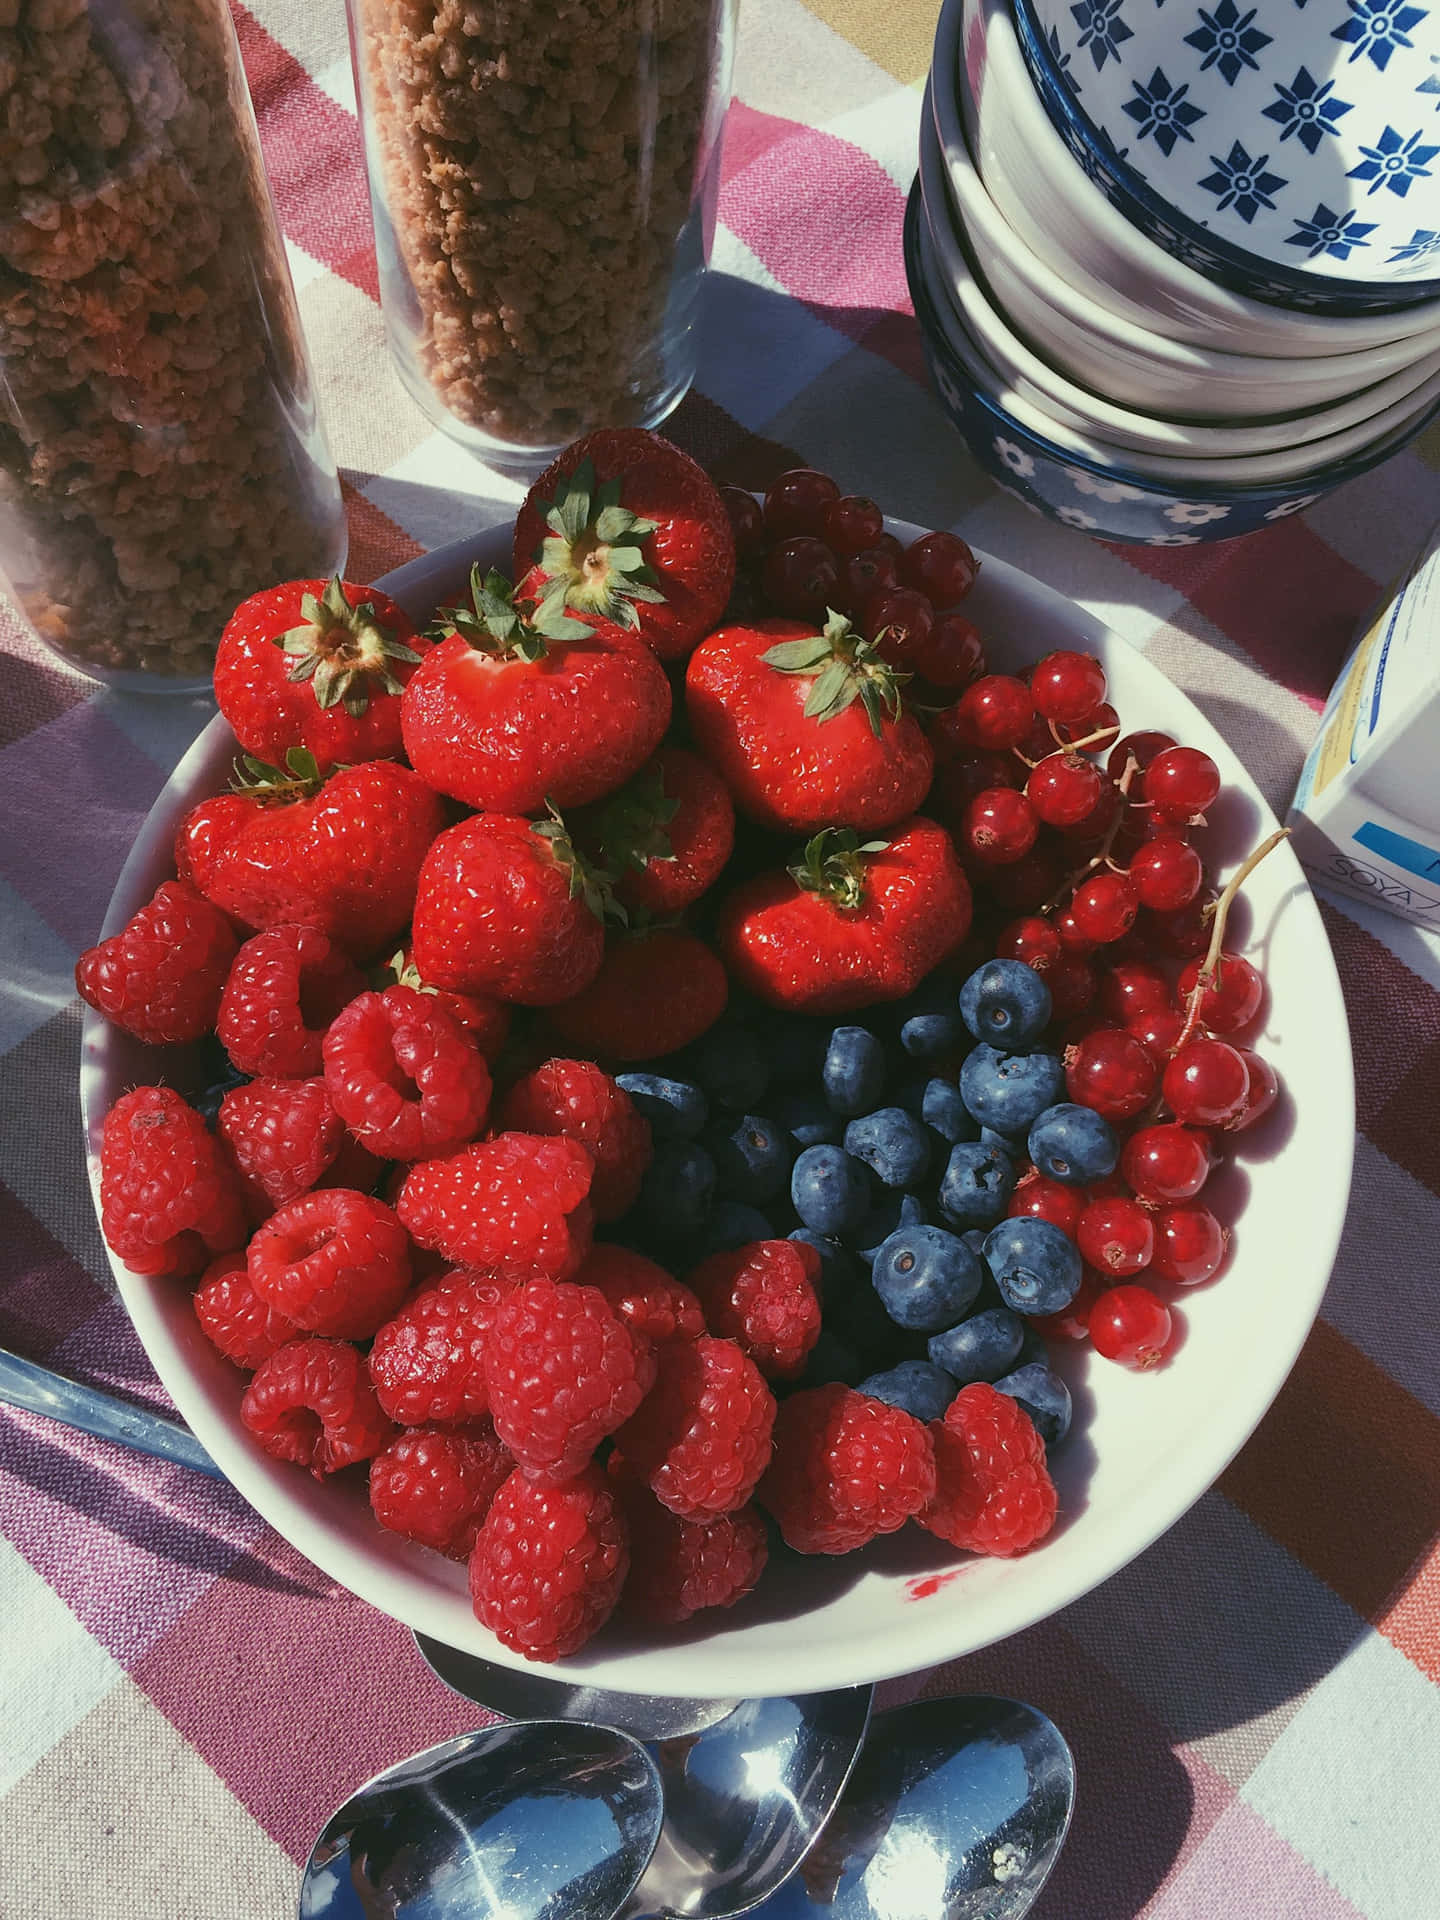 A Plate Of Berries And Cereal